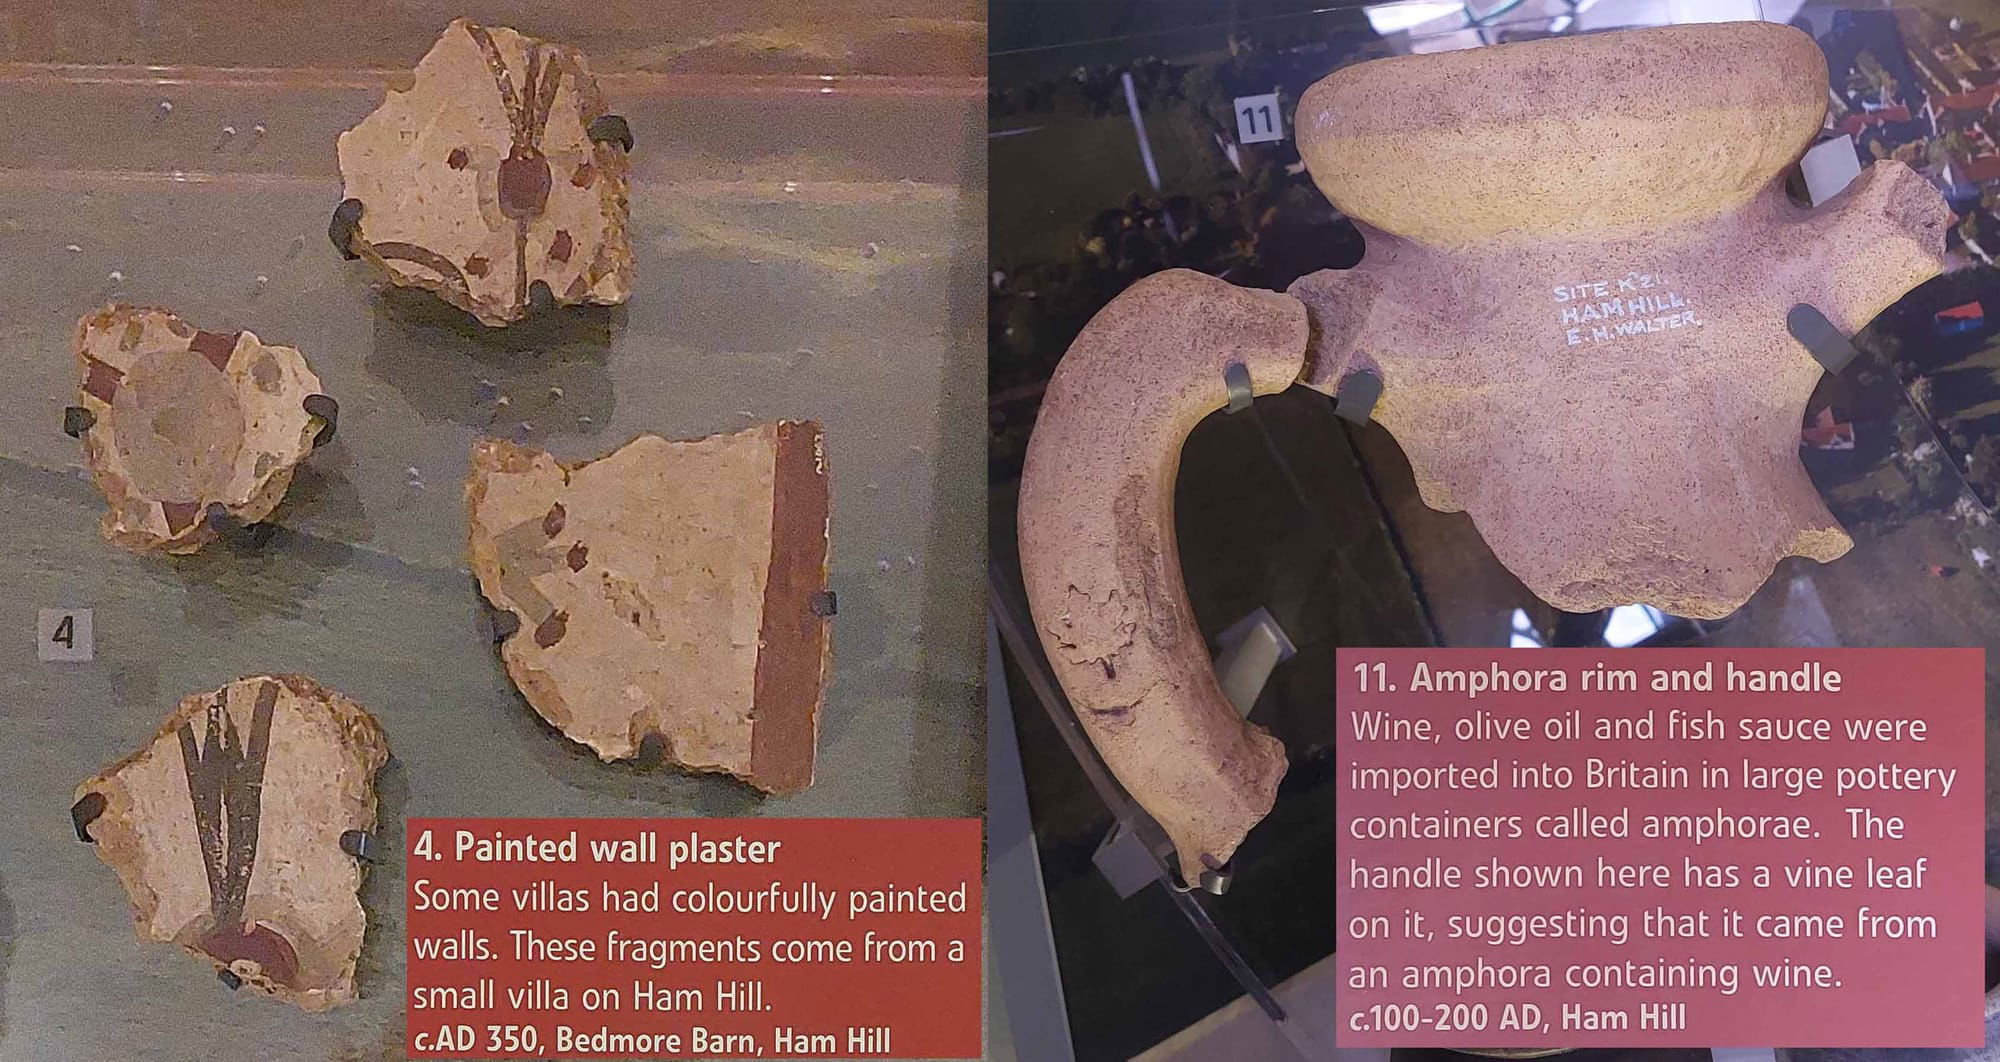 photo of fragments of painted wall paster and the rim and handle from  pottery amphora with a dull textured surface, looks like a pin-coloured clay